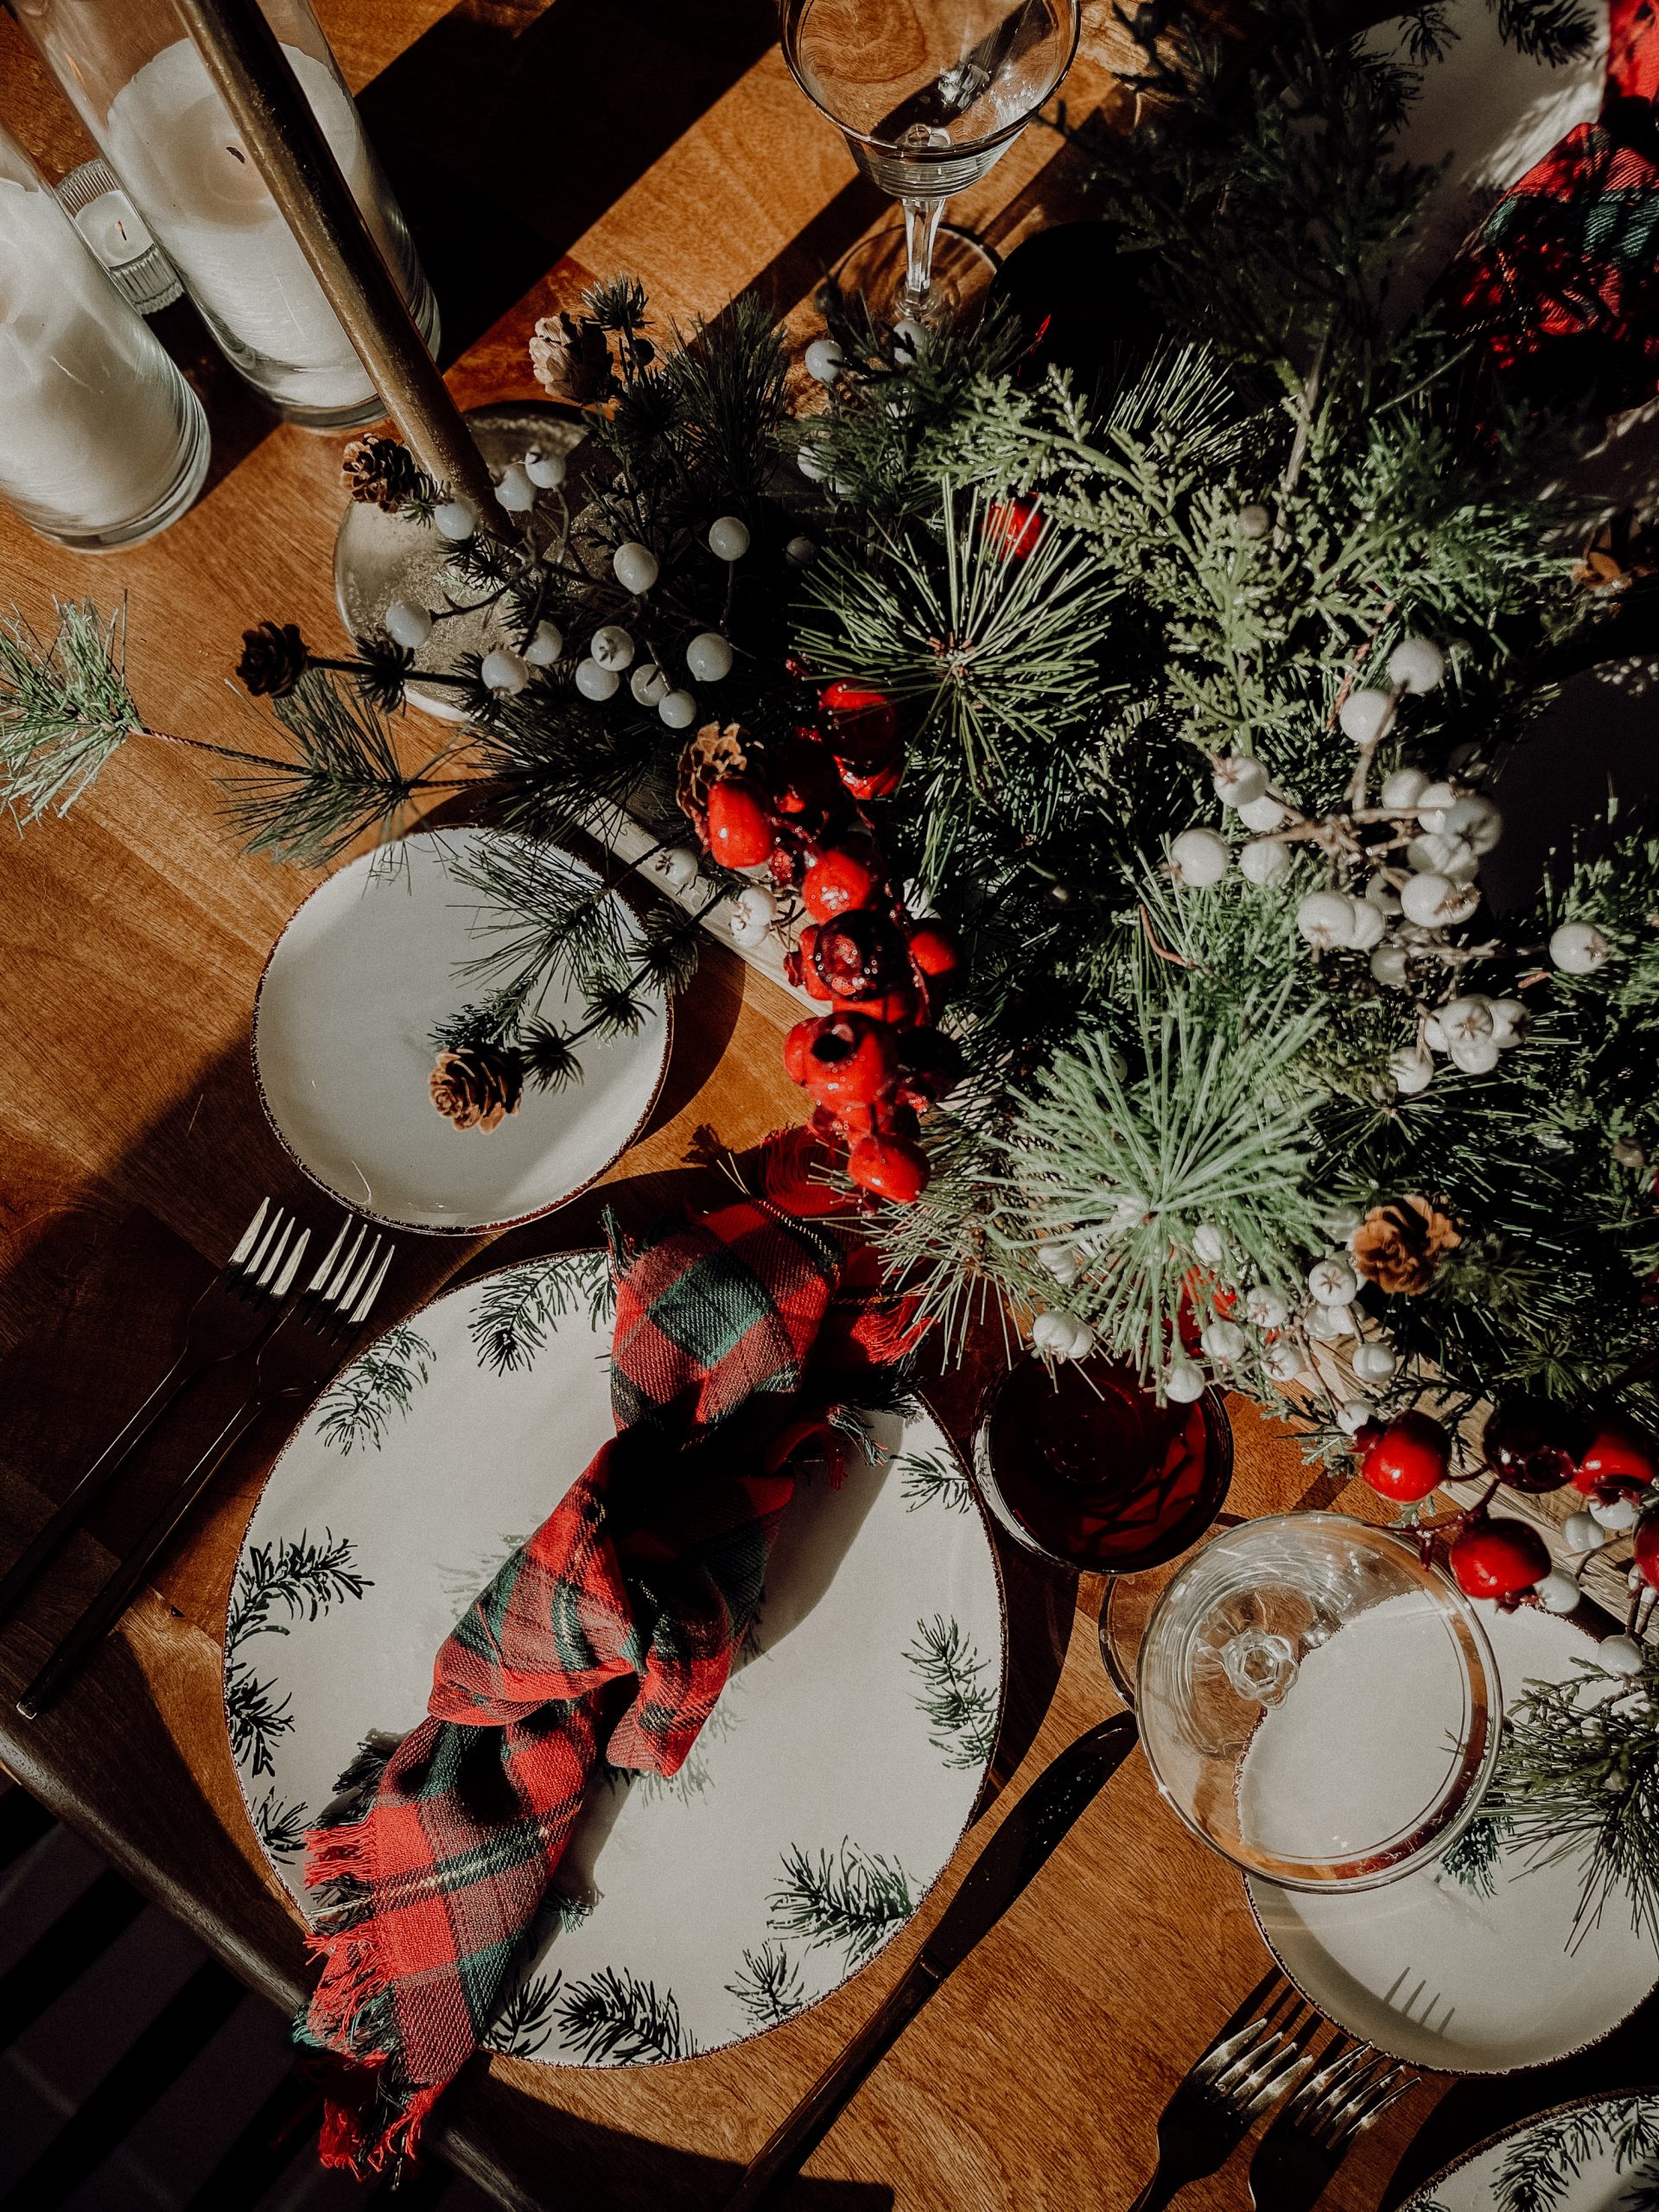 A traditional Christmas dining room table design with a modern twist featuring Tartan Plaid, pops of black and pine tree accents. 

See more on
www.mirandaschroeder.com